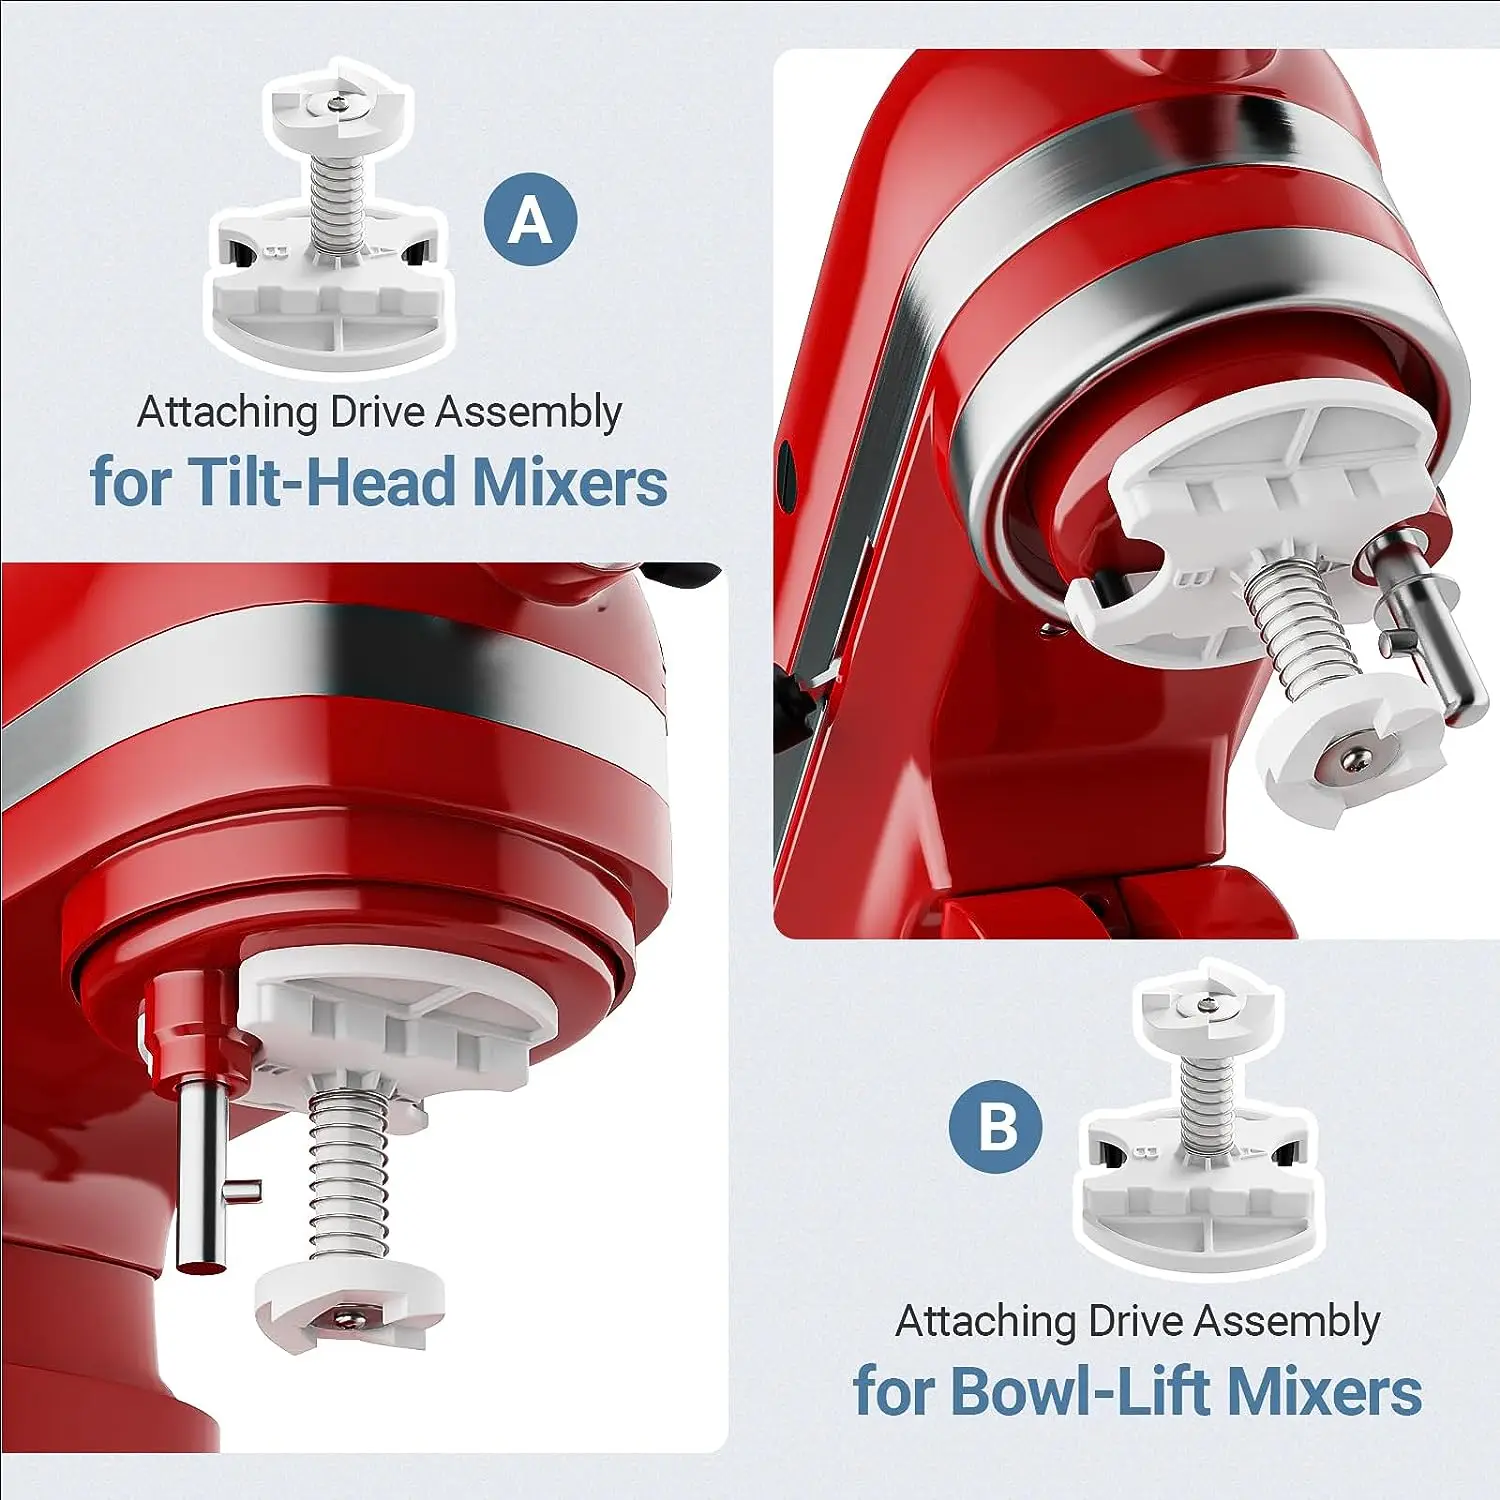 https://ae01.alicdn.com/kf/S1ba46a3d343a4e5c88b5bac99b81bd01C/Ice-Cream-Maker-Attachment-for-KitchenAid-Stand-Mixer-Compatible-with-KitchenAid-4-5-Qt-and-Larger.jpg